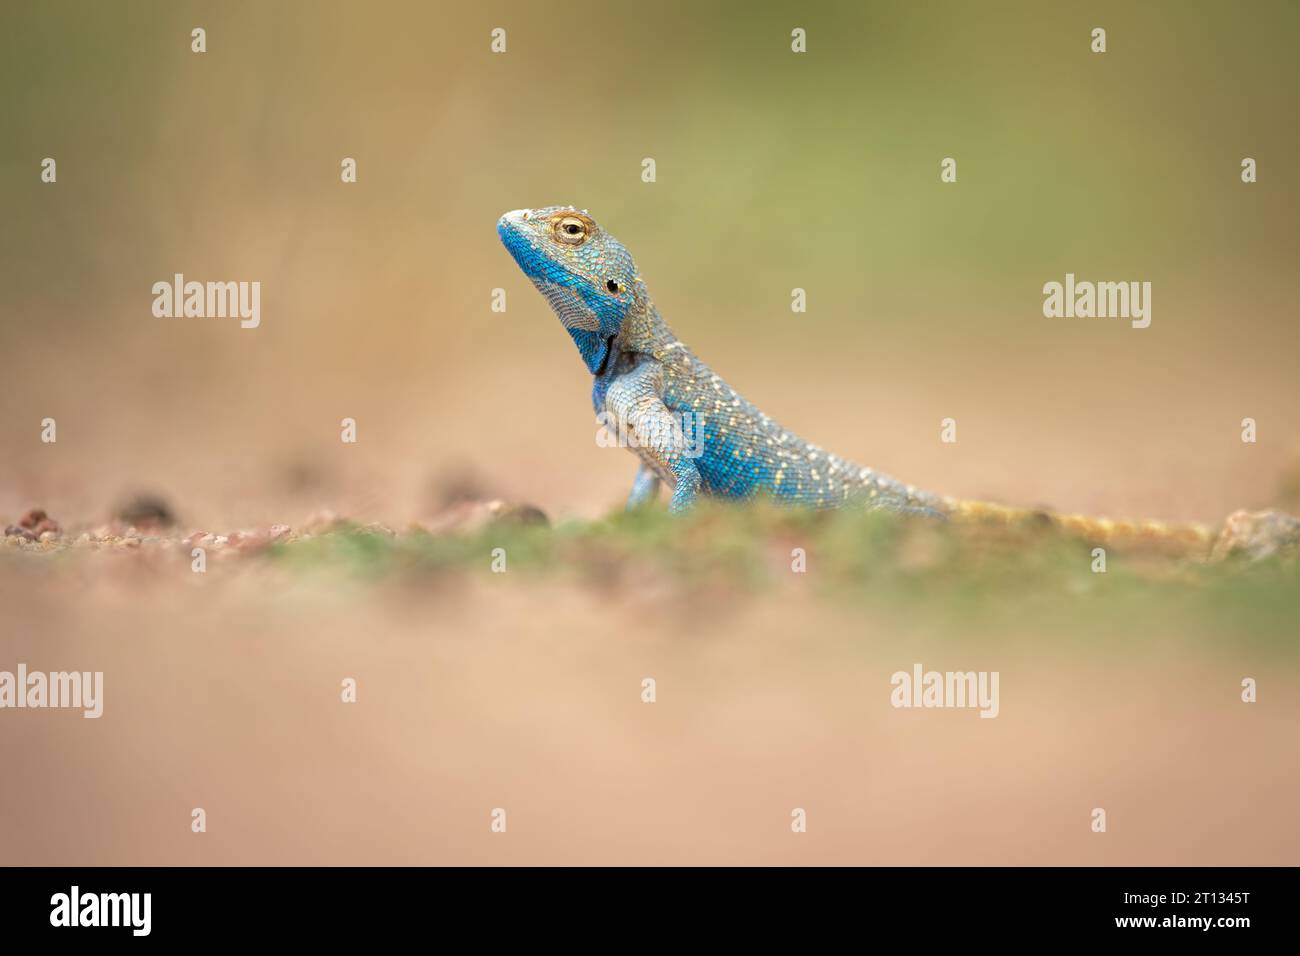 Portrait of a brilliant ground agama from Jaisalmer, Rajasthan, India Stock Photo